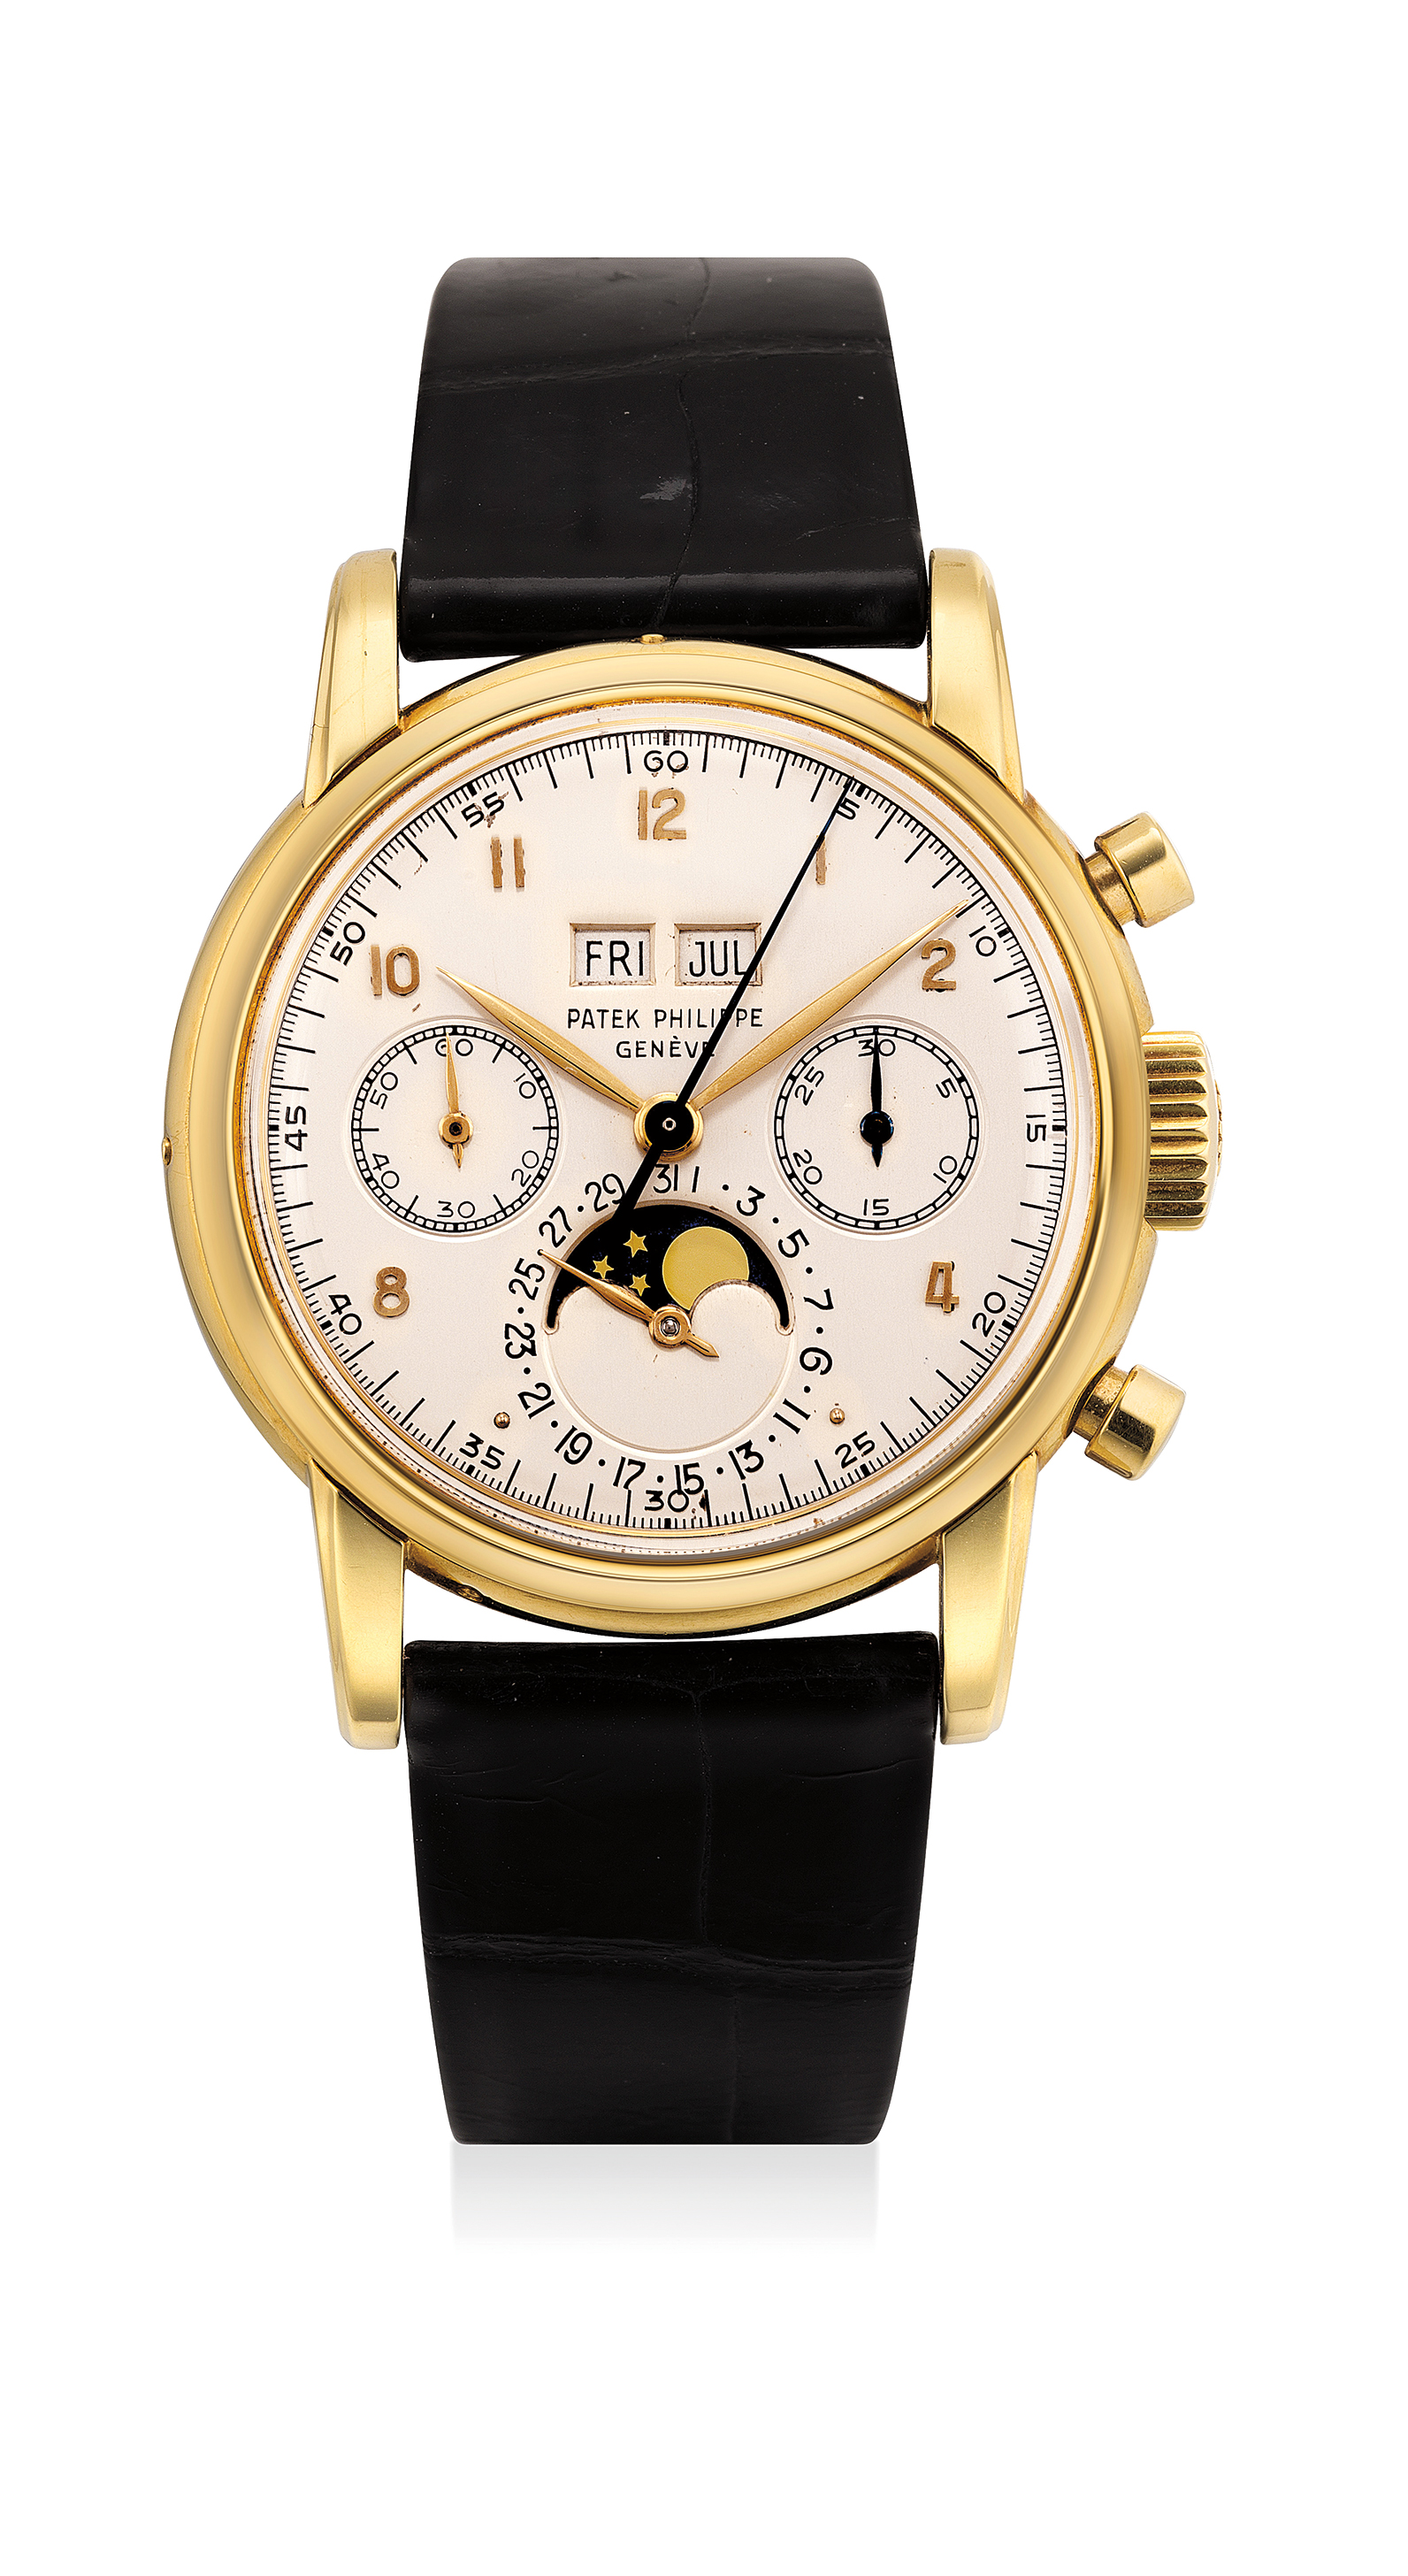 Yellow gold perpetual calendar wristwatch with moonphase. Sold for $641,500